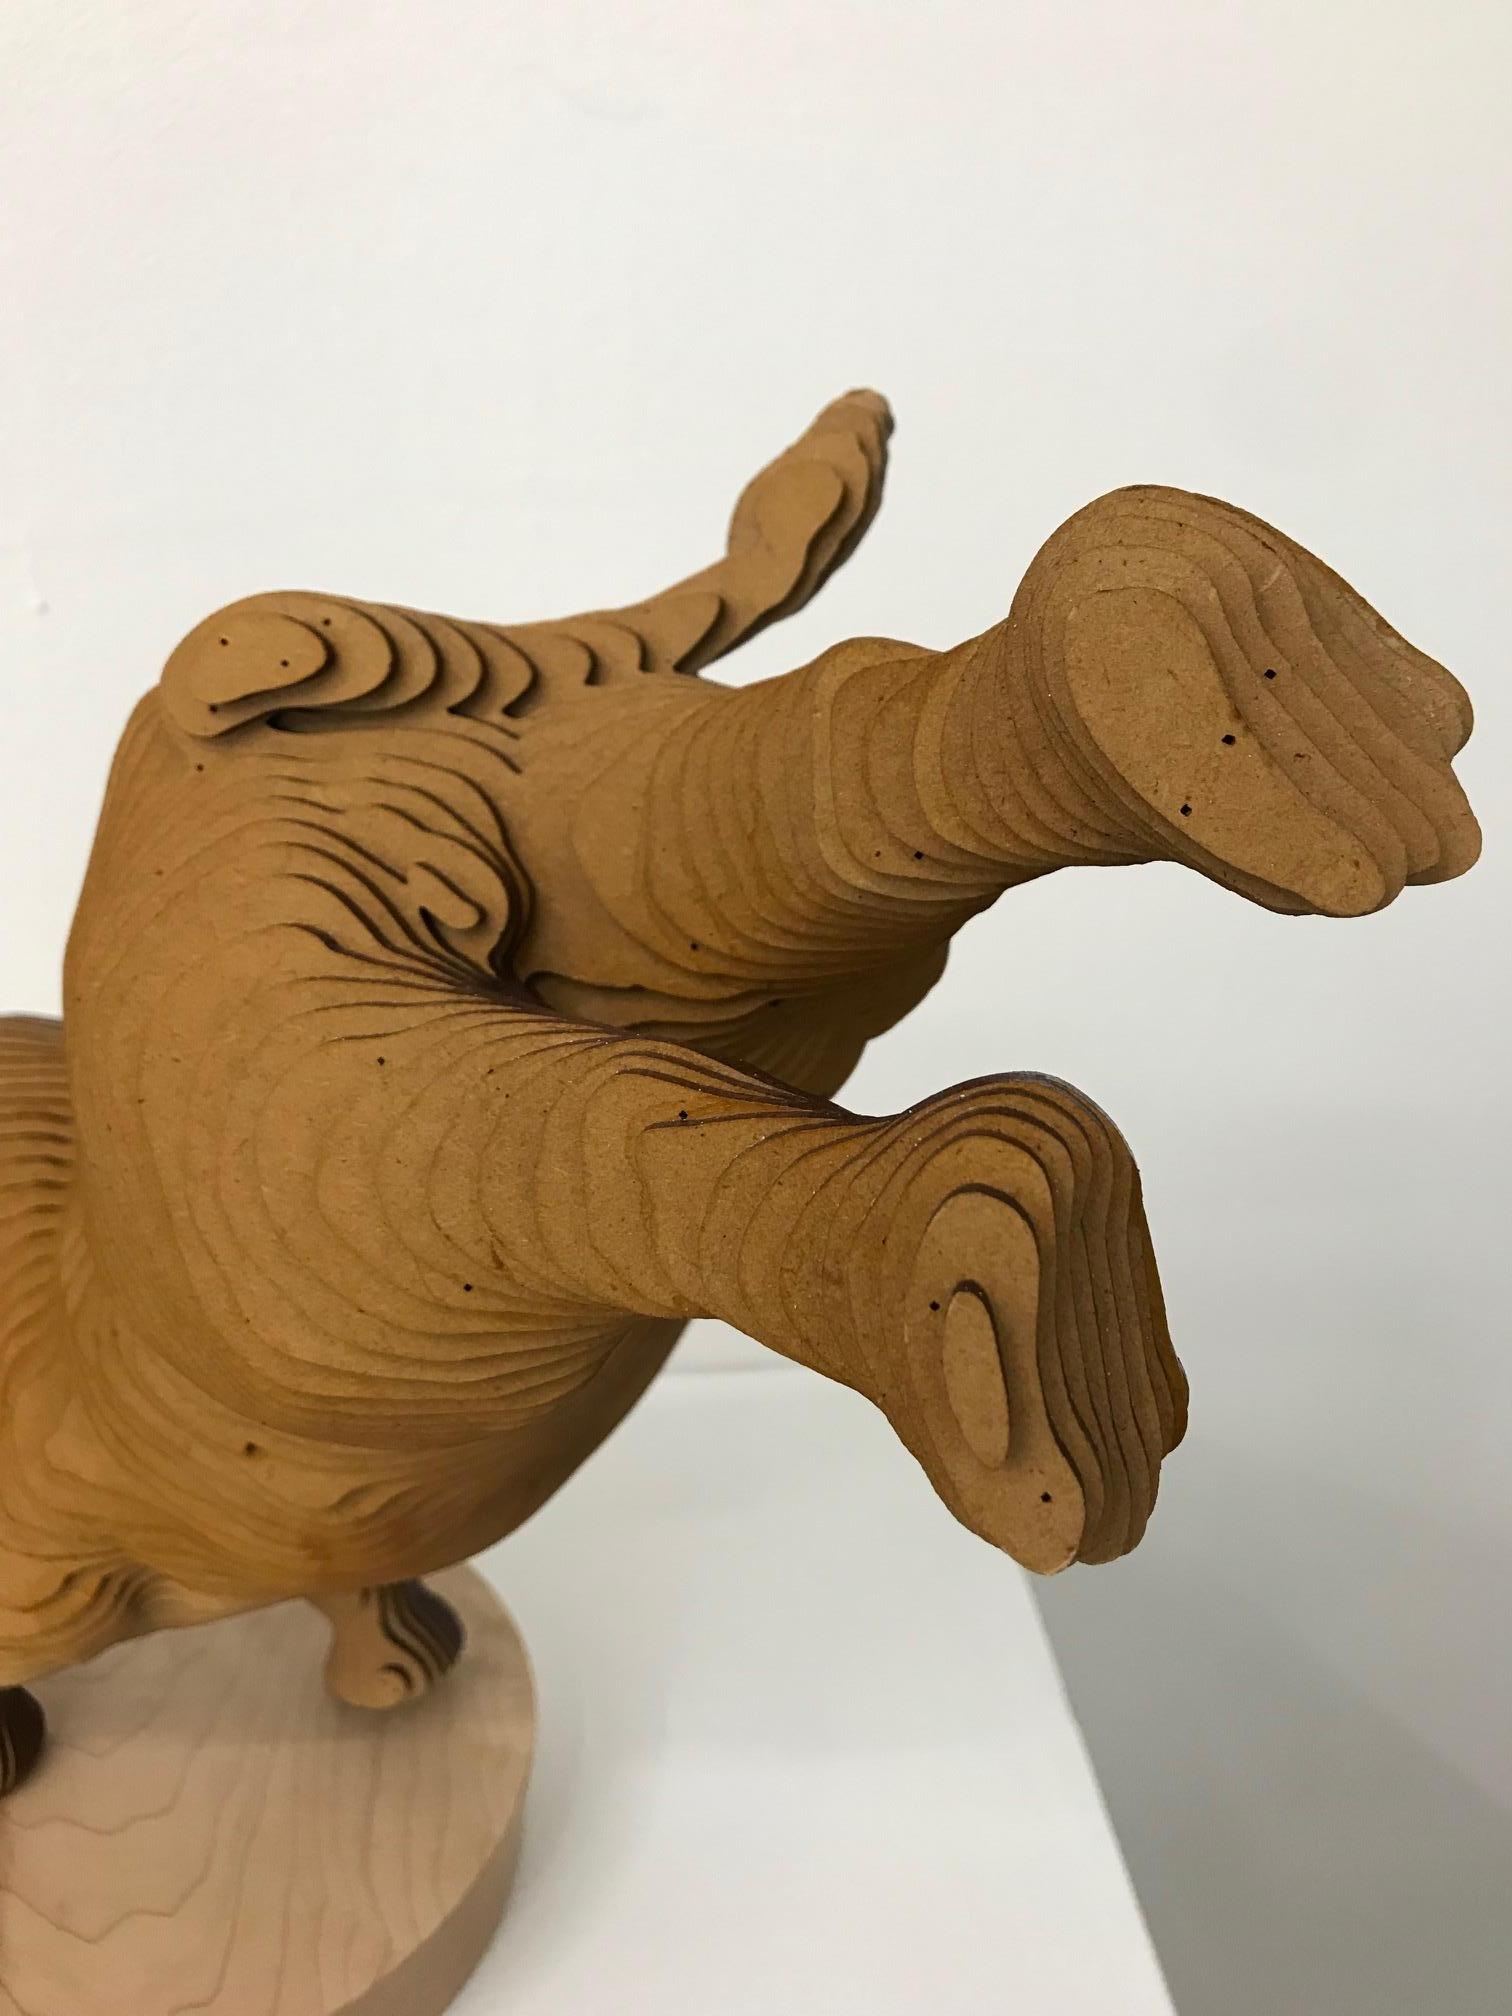 Ballerhino..Contemporary whimsical animal sculpture, wood slices, dancing rhino - Brown Still-Life Sculpture by Olivier Duhamel